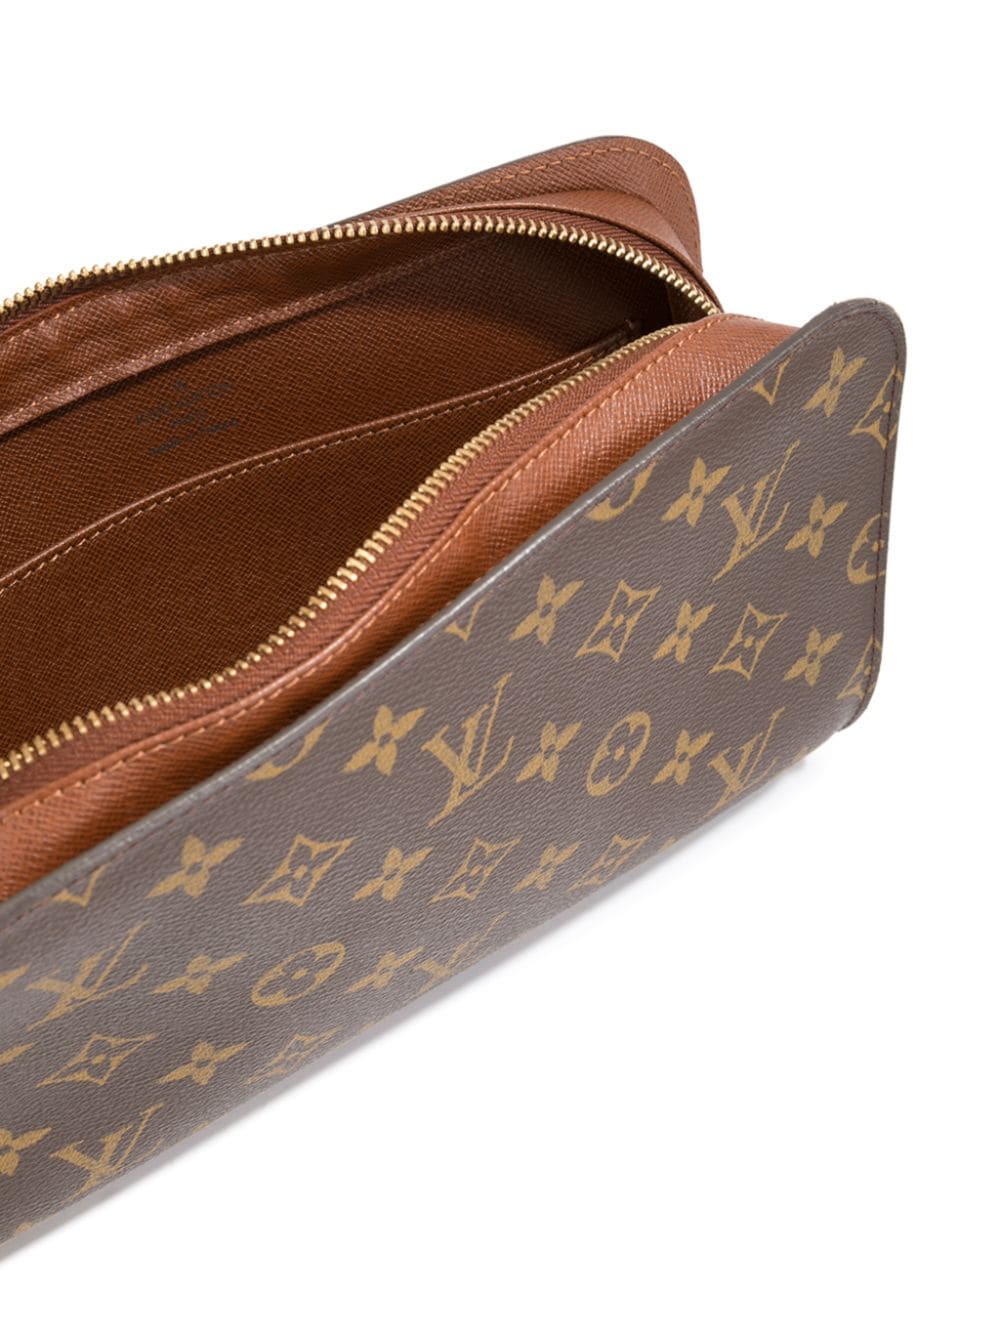 LOUIS VUITTON Orsay Clutch Hand Bag Monogram Leather Brown France